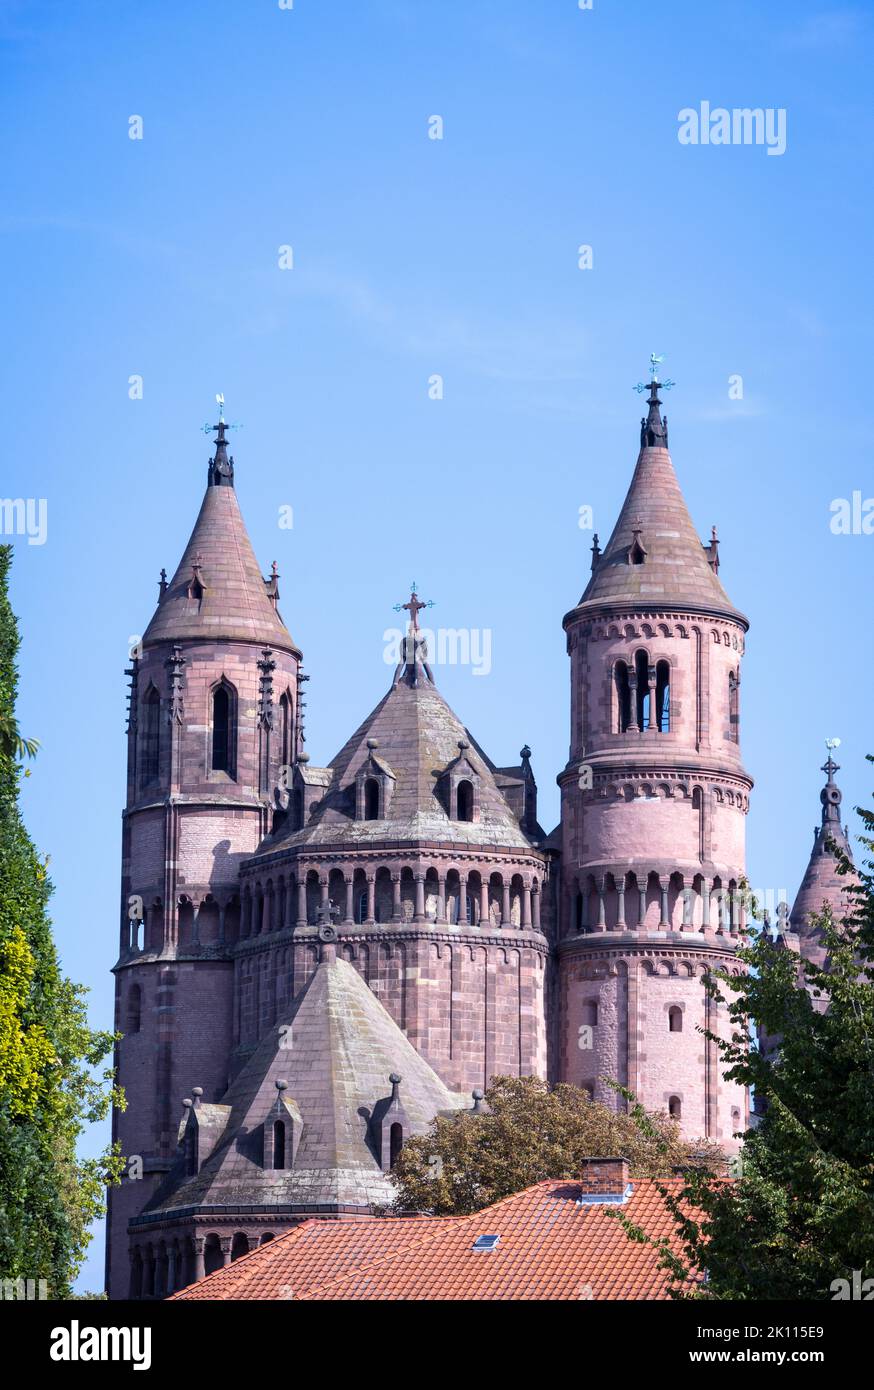 towers of St Peter's Cathedral, Wormser Dom, Worms, Rhineland-Palatinate, Germany Stock Photo